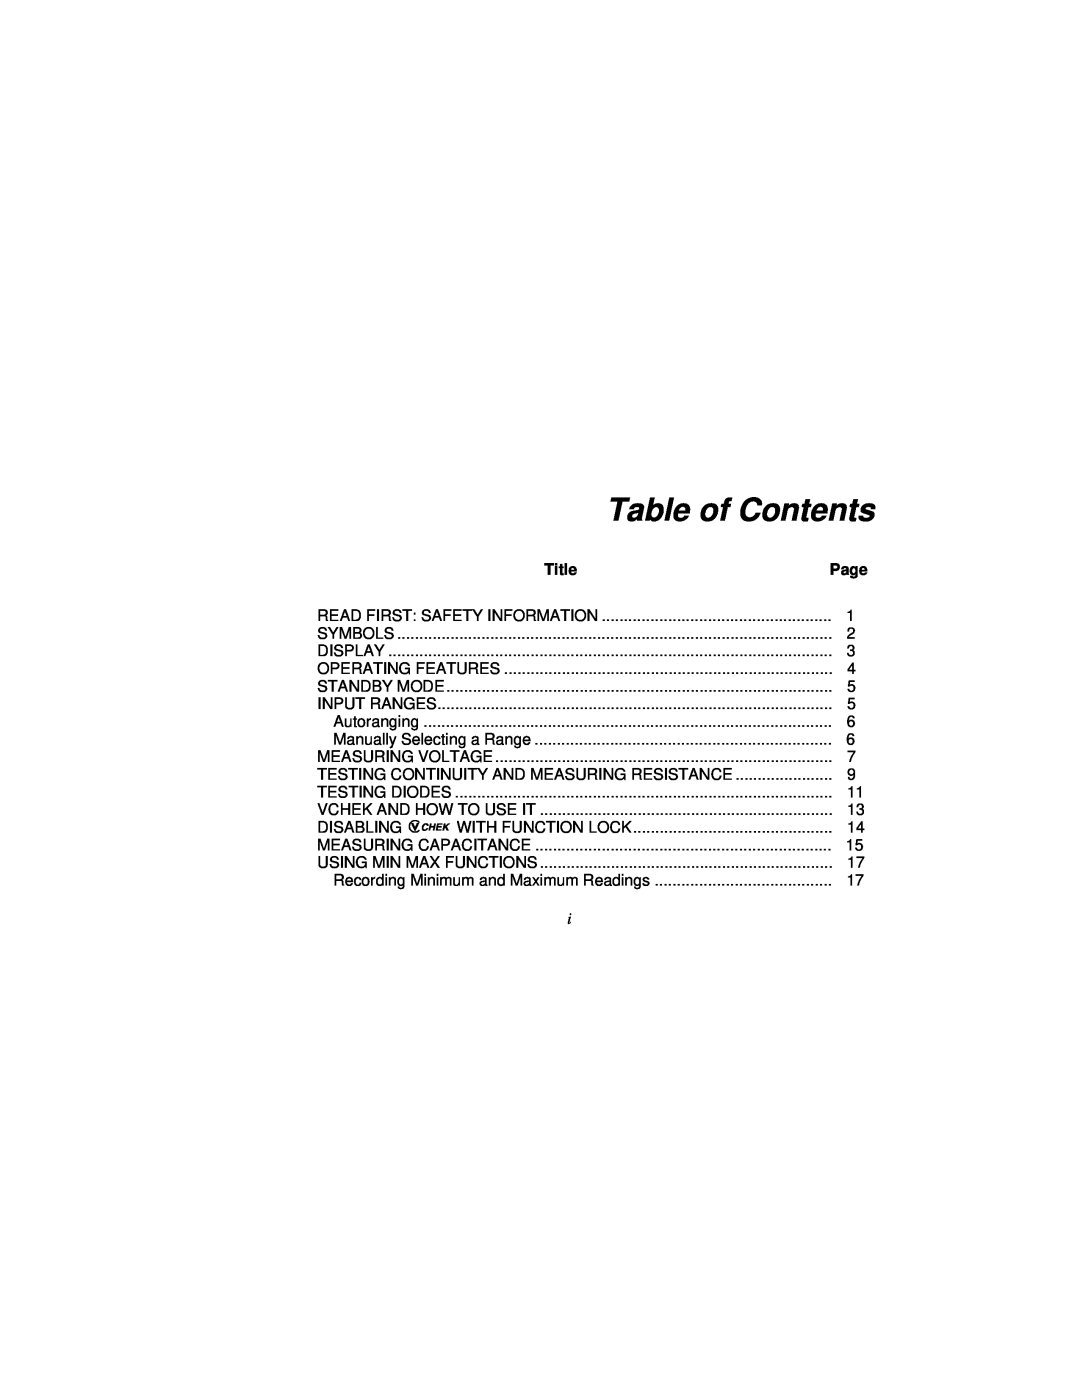 Fluke PN 2063508 user manual Title, Page, Table of Contents 